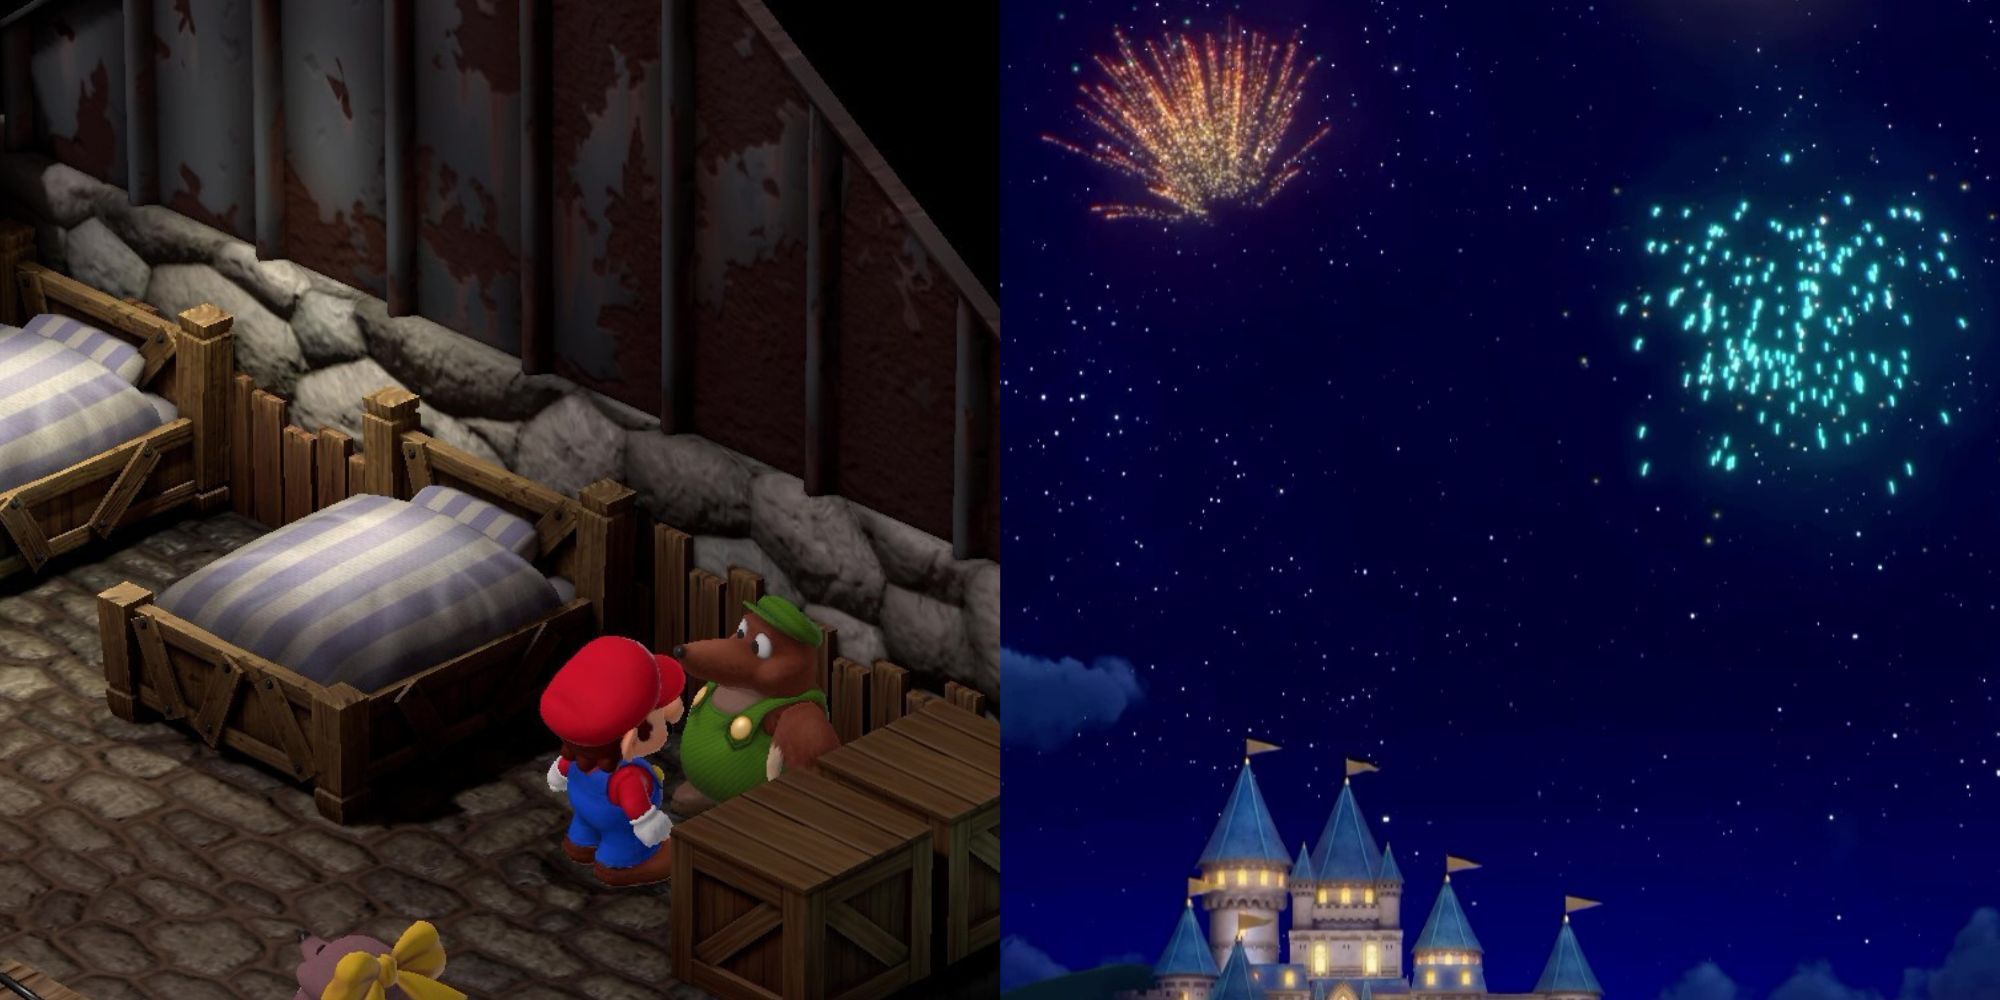 A split image of Mario buying and using the Fireworks in Super Mario RPG